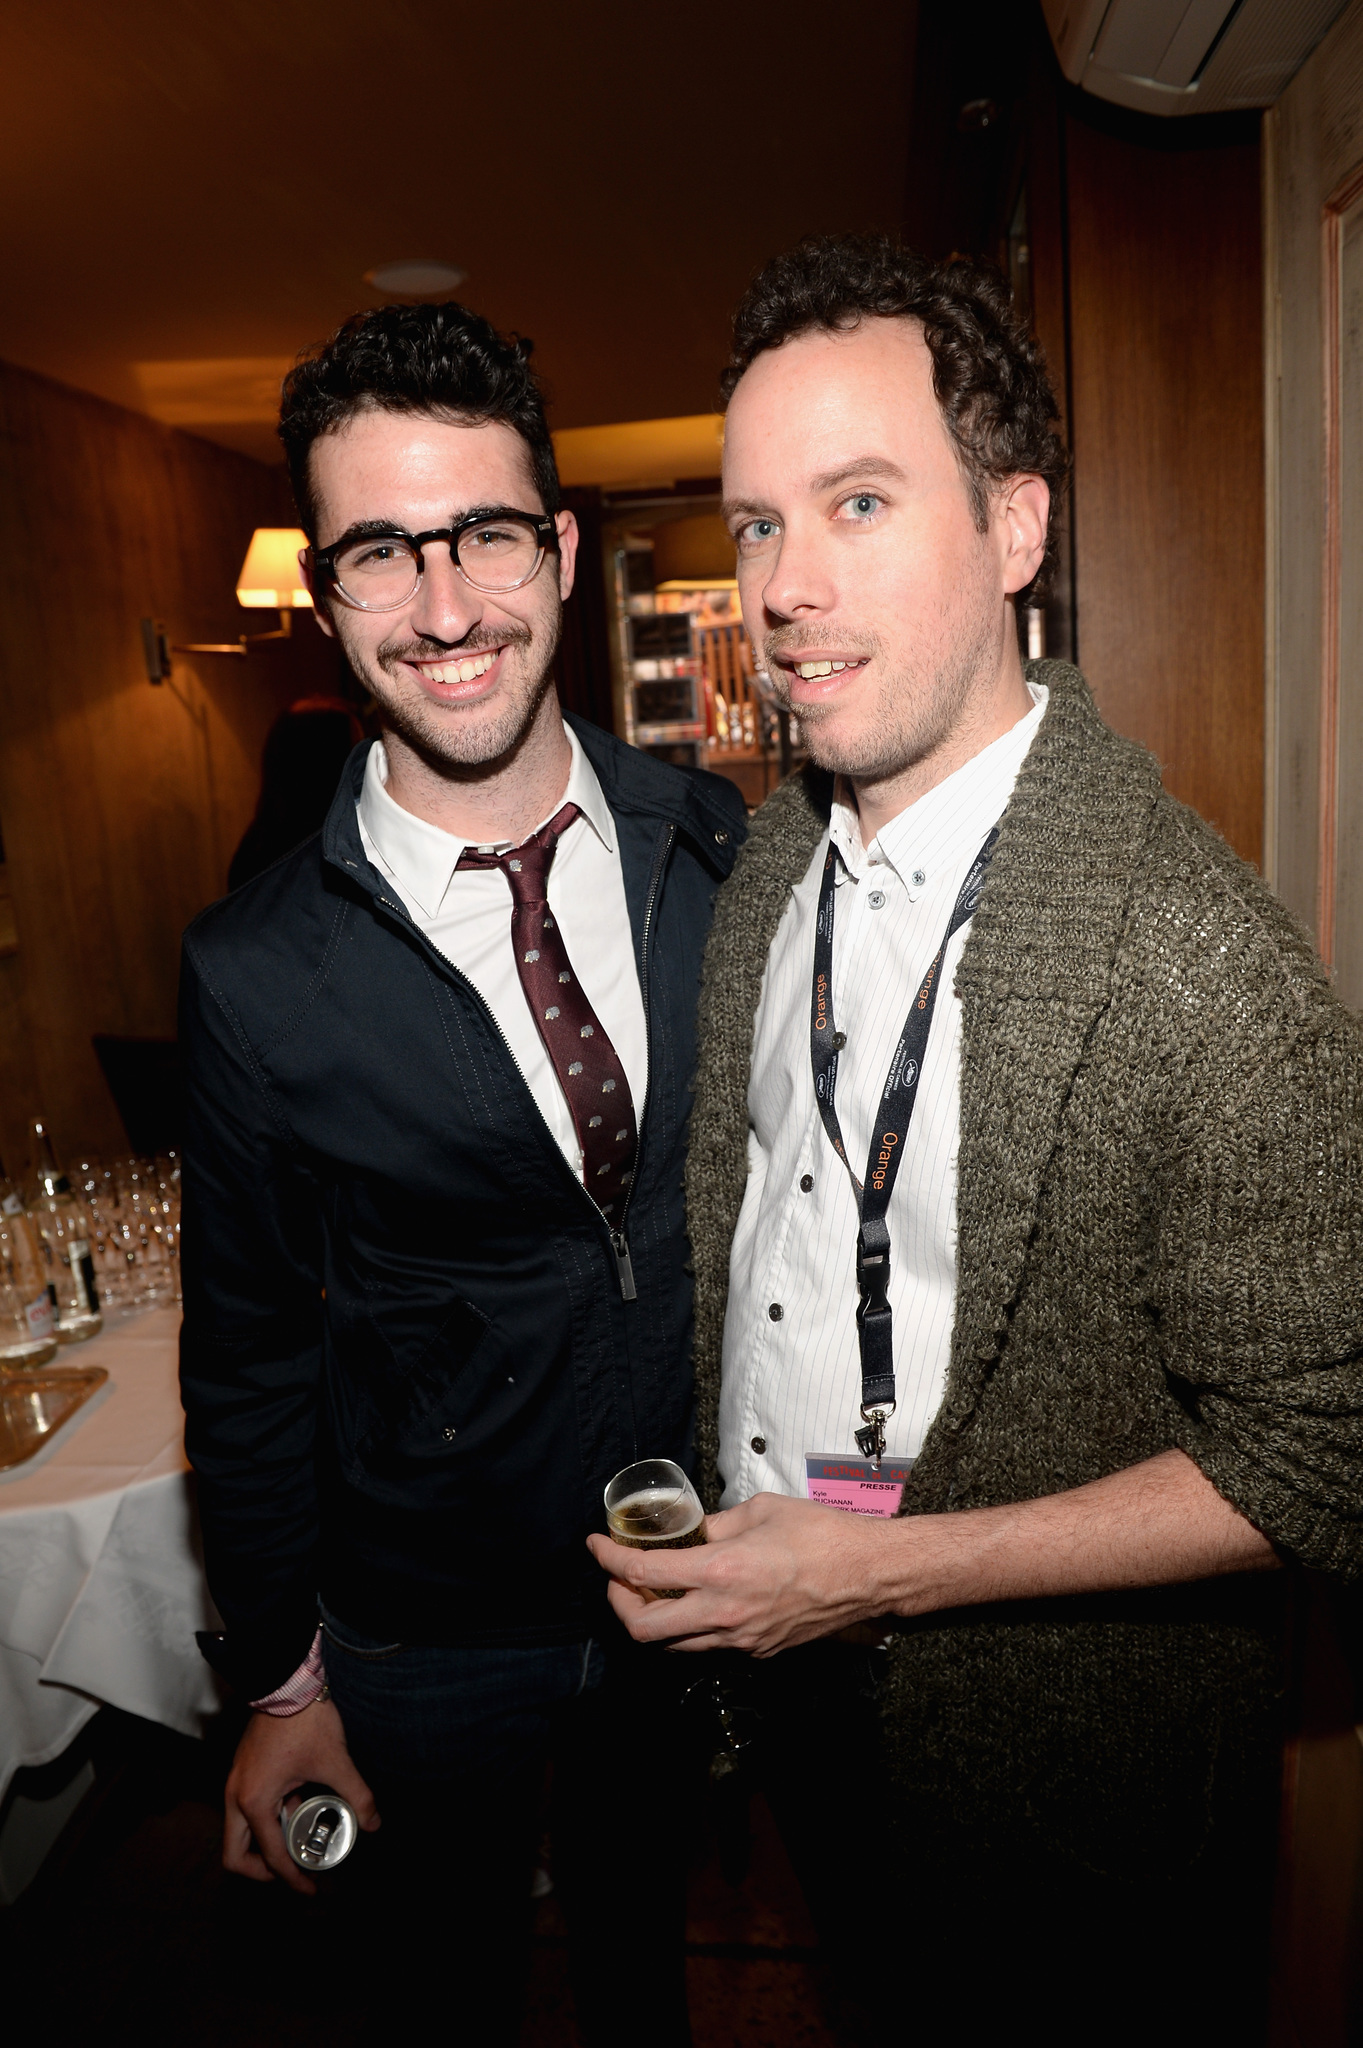 Actor Jordan Firstman and Vulture.com's Kyle Buchanan attend the IMDB's 2013 Cannes Film Festival Dinner Party during the 66th Annual Cannes Film Festival at Restaurant Mantel on May 20, 2013 in Cannes, France.